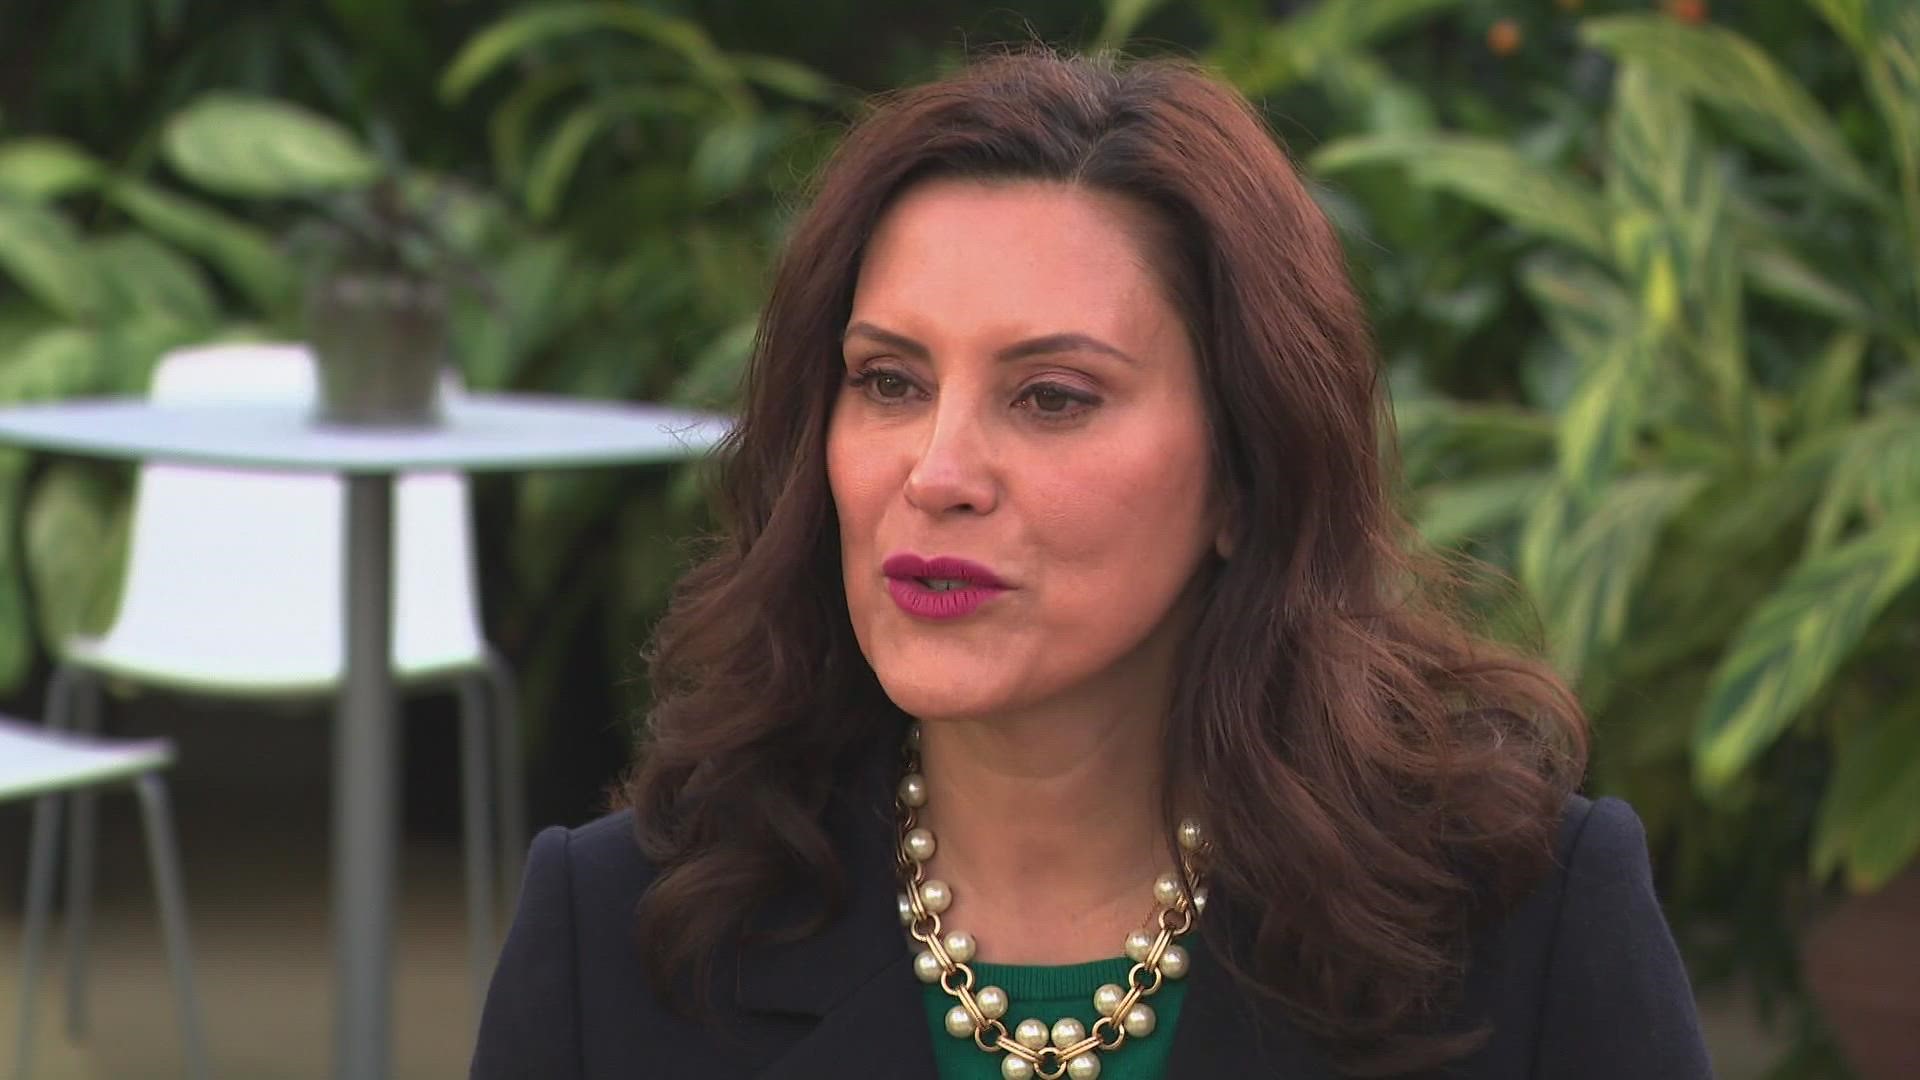 Speaking about a reflection on 2021, Whitmer said, "We're doing a lot of the fundamentals. We're making progress," but said there is more work to do.